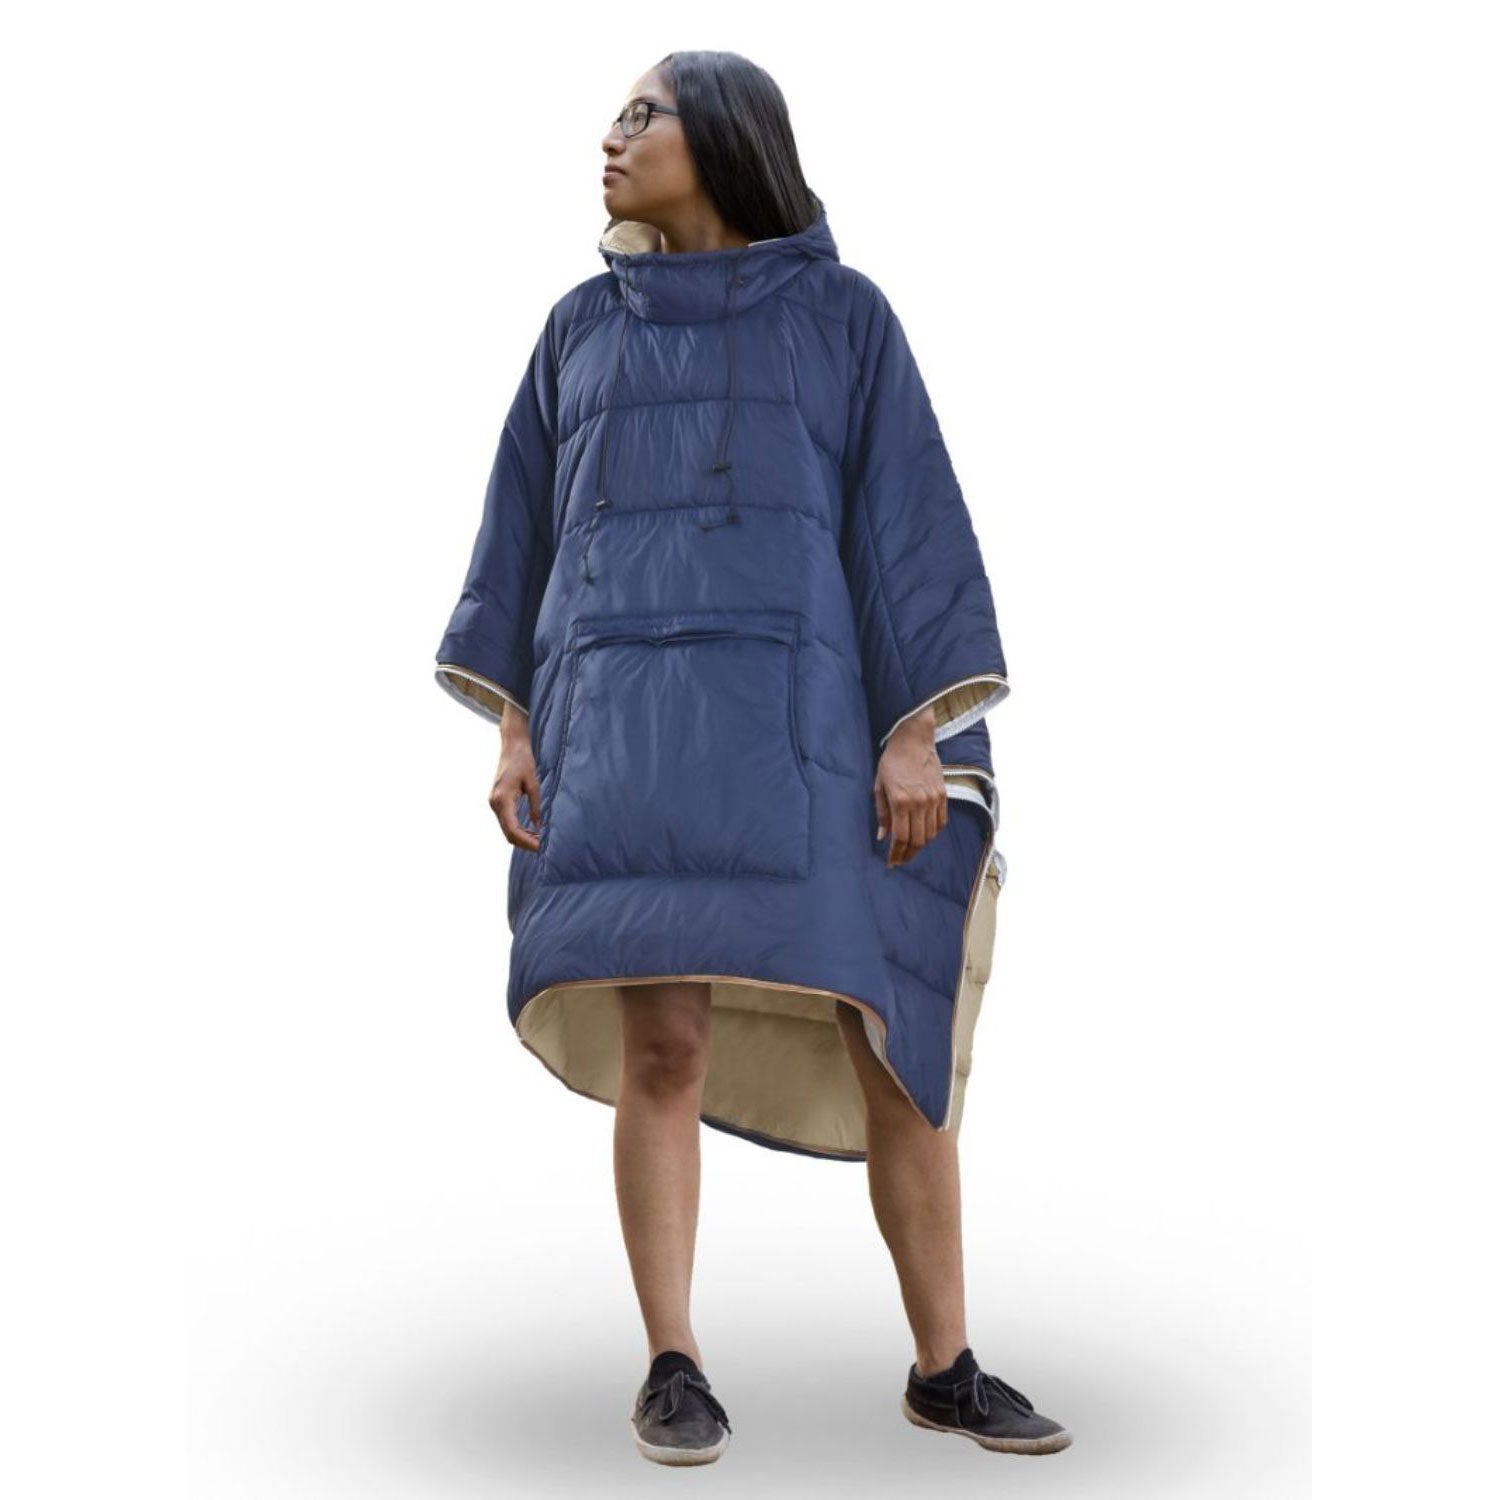 The Home Collection Great Outdoors 3 in 1 Poncho 5 Shaws Department Stores